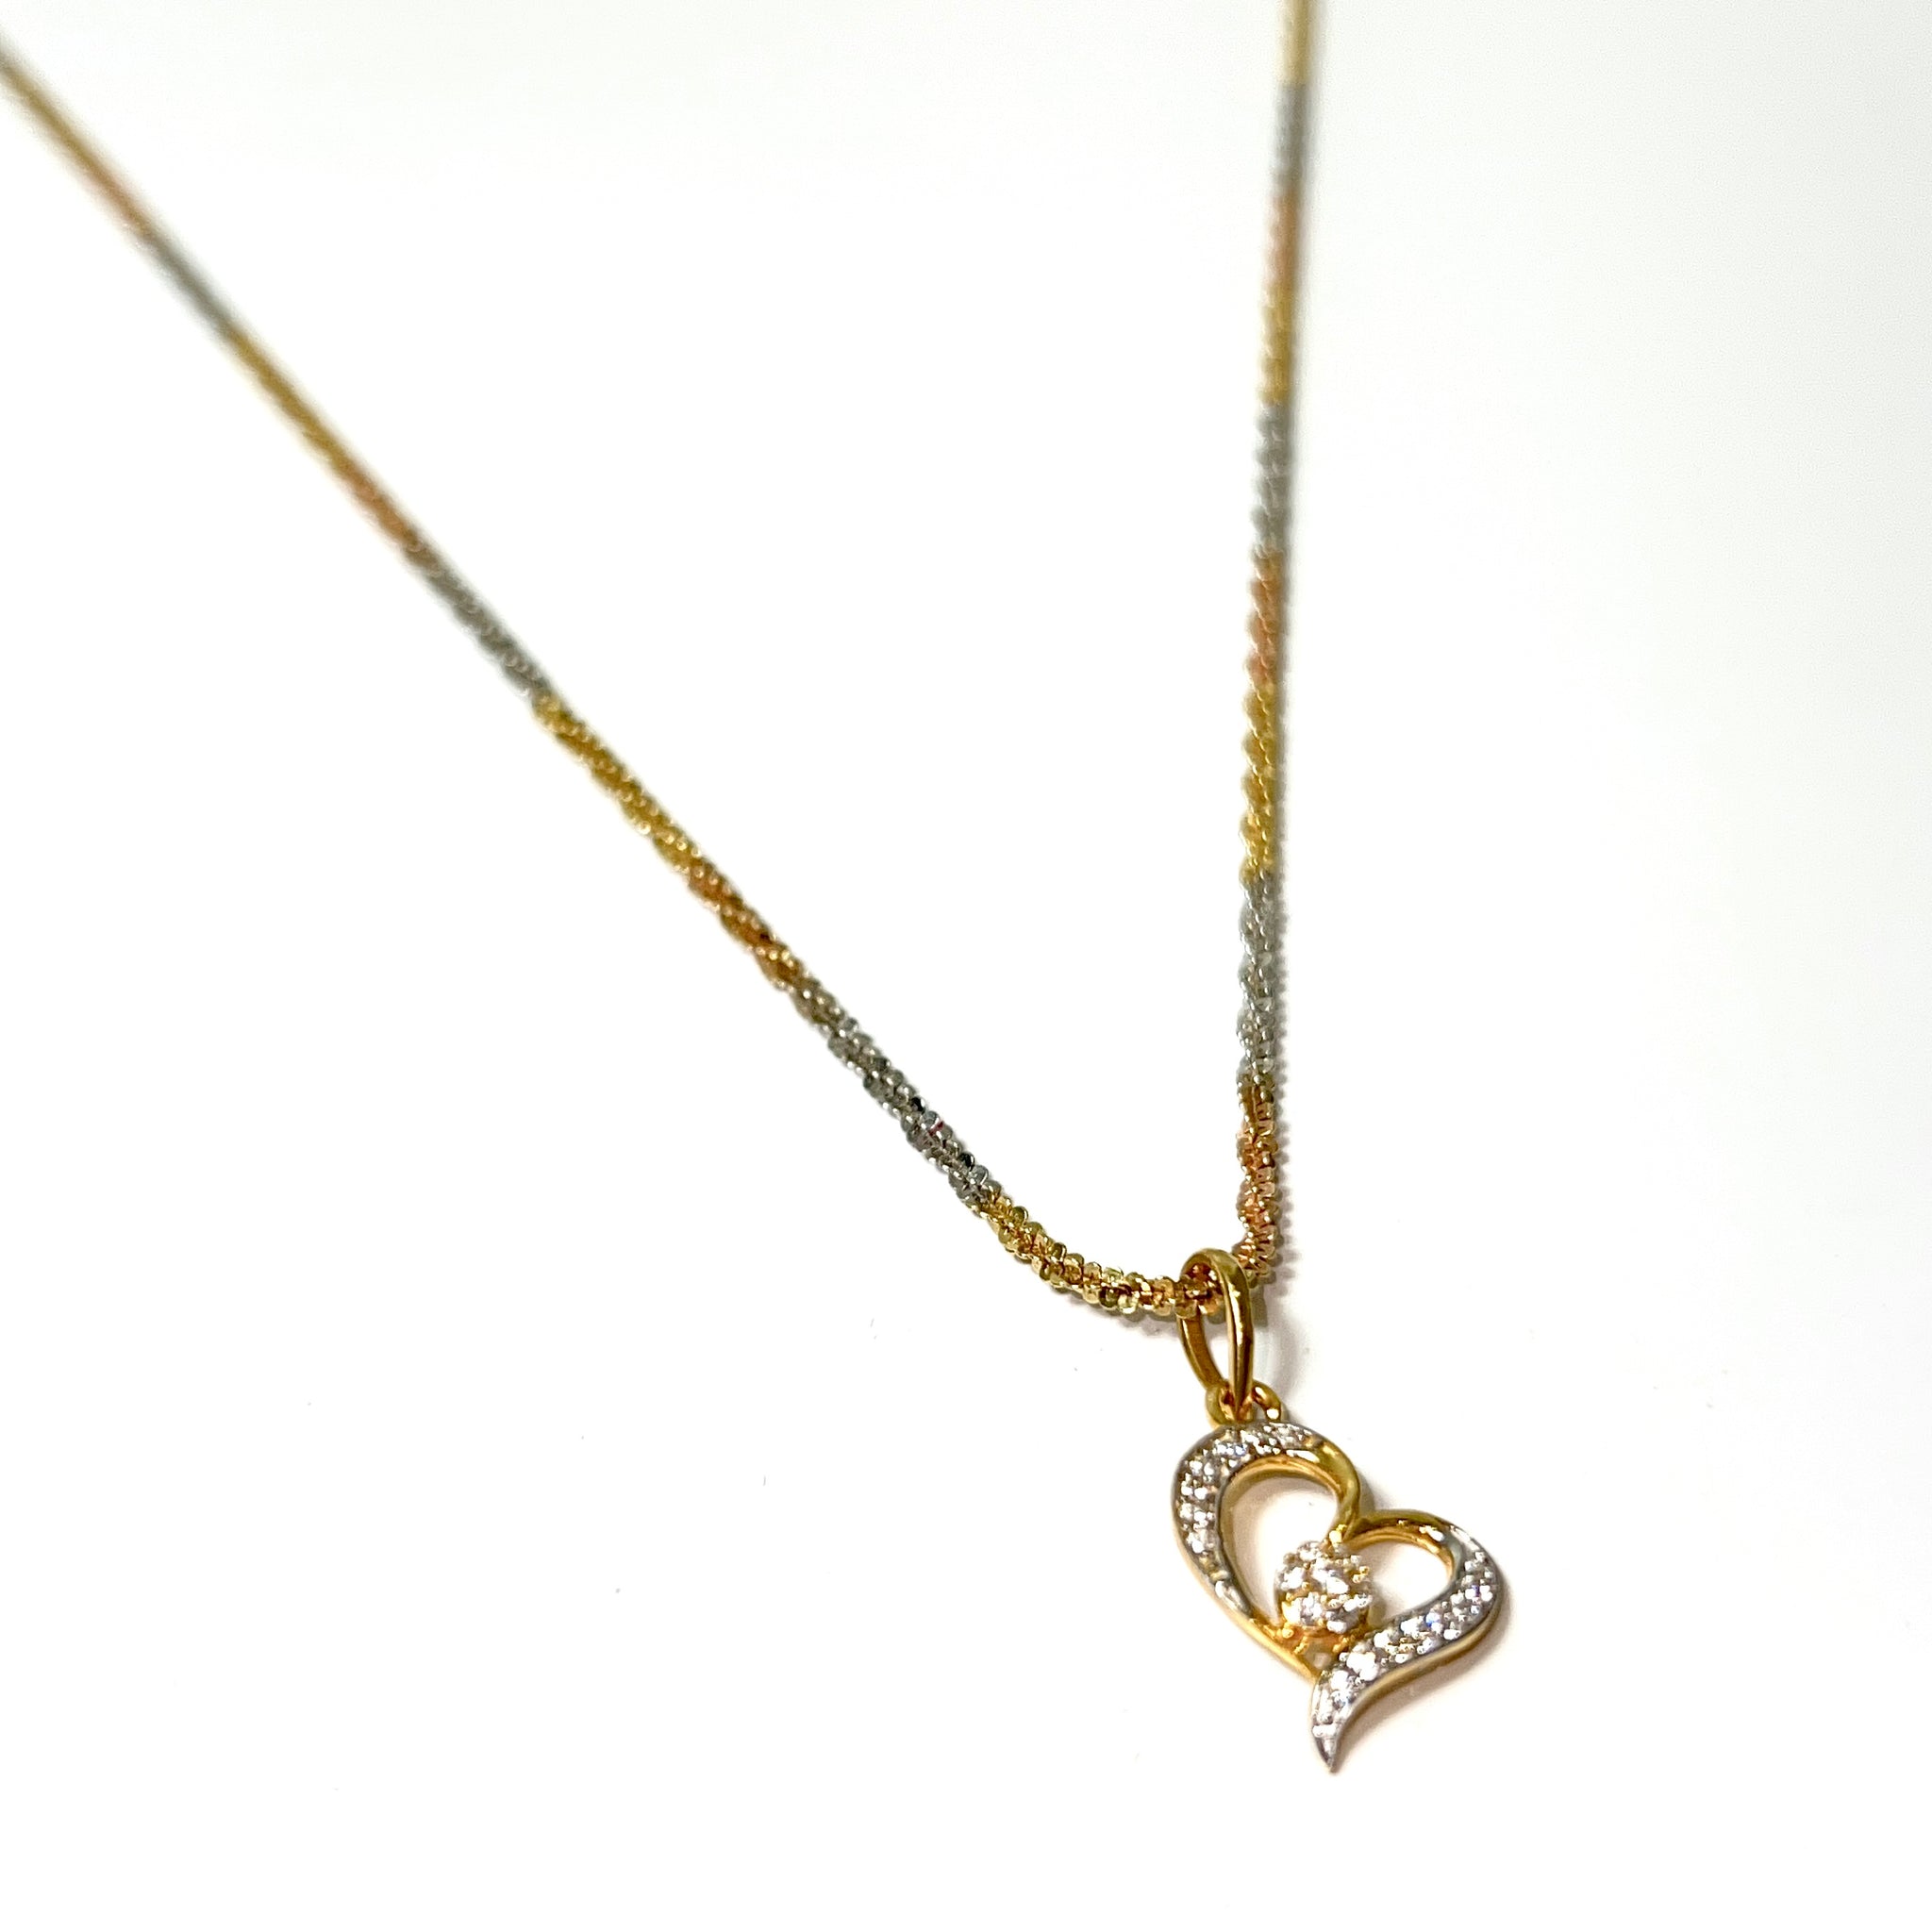 Hart pendant with Tricolor Neckless - 18 Carat Gold - 58cm / 2mm - 422